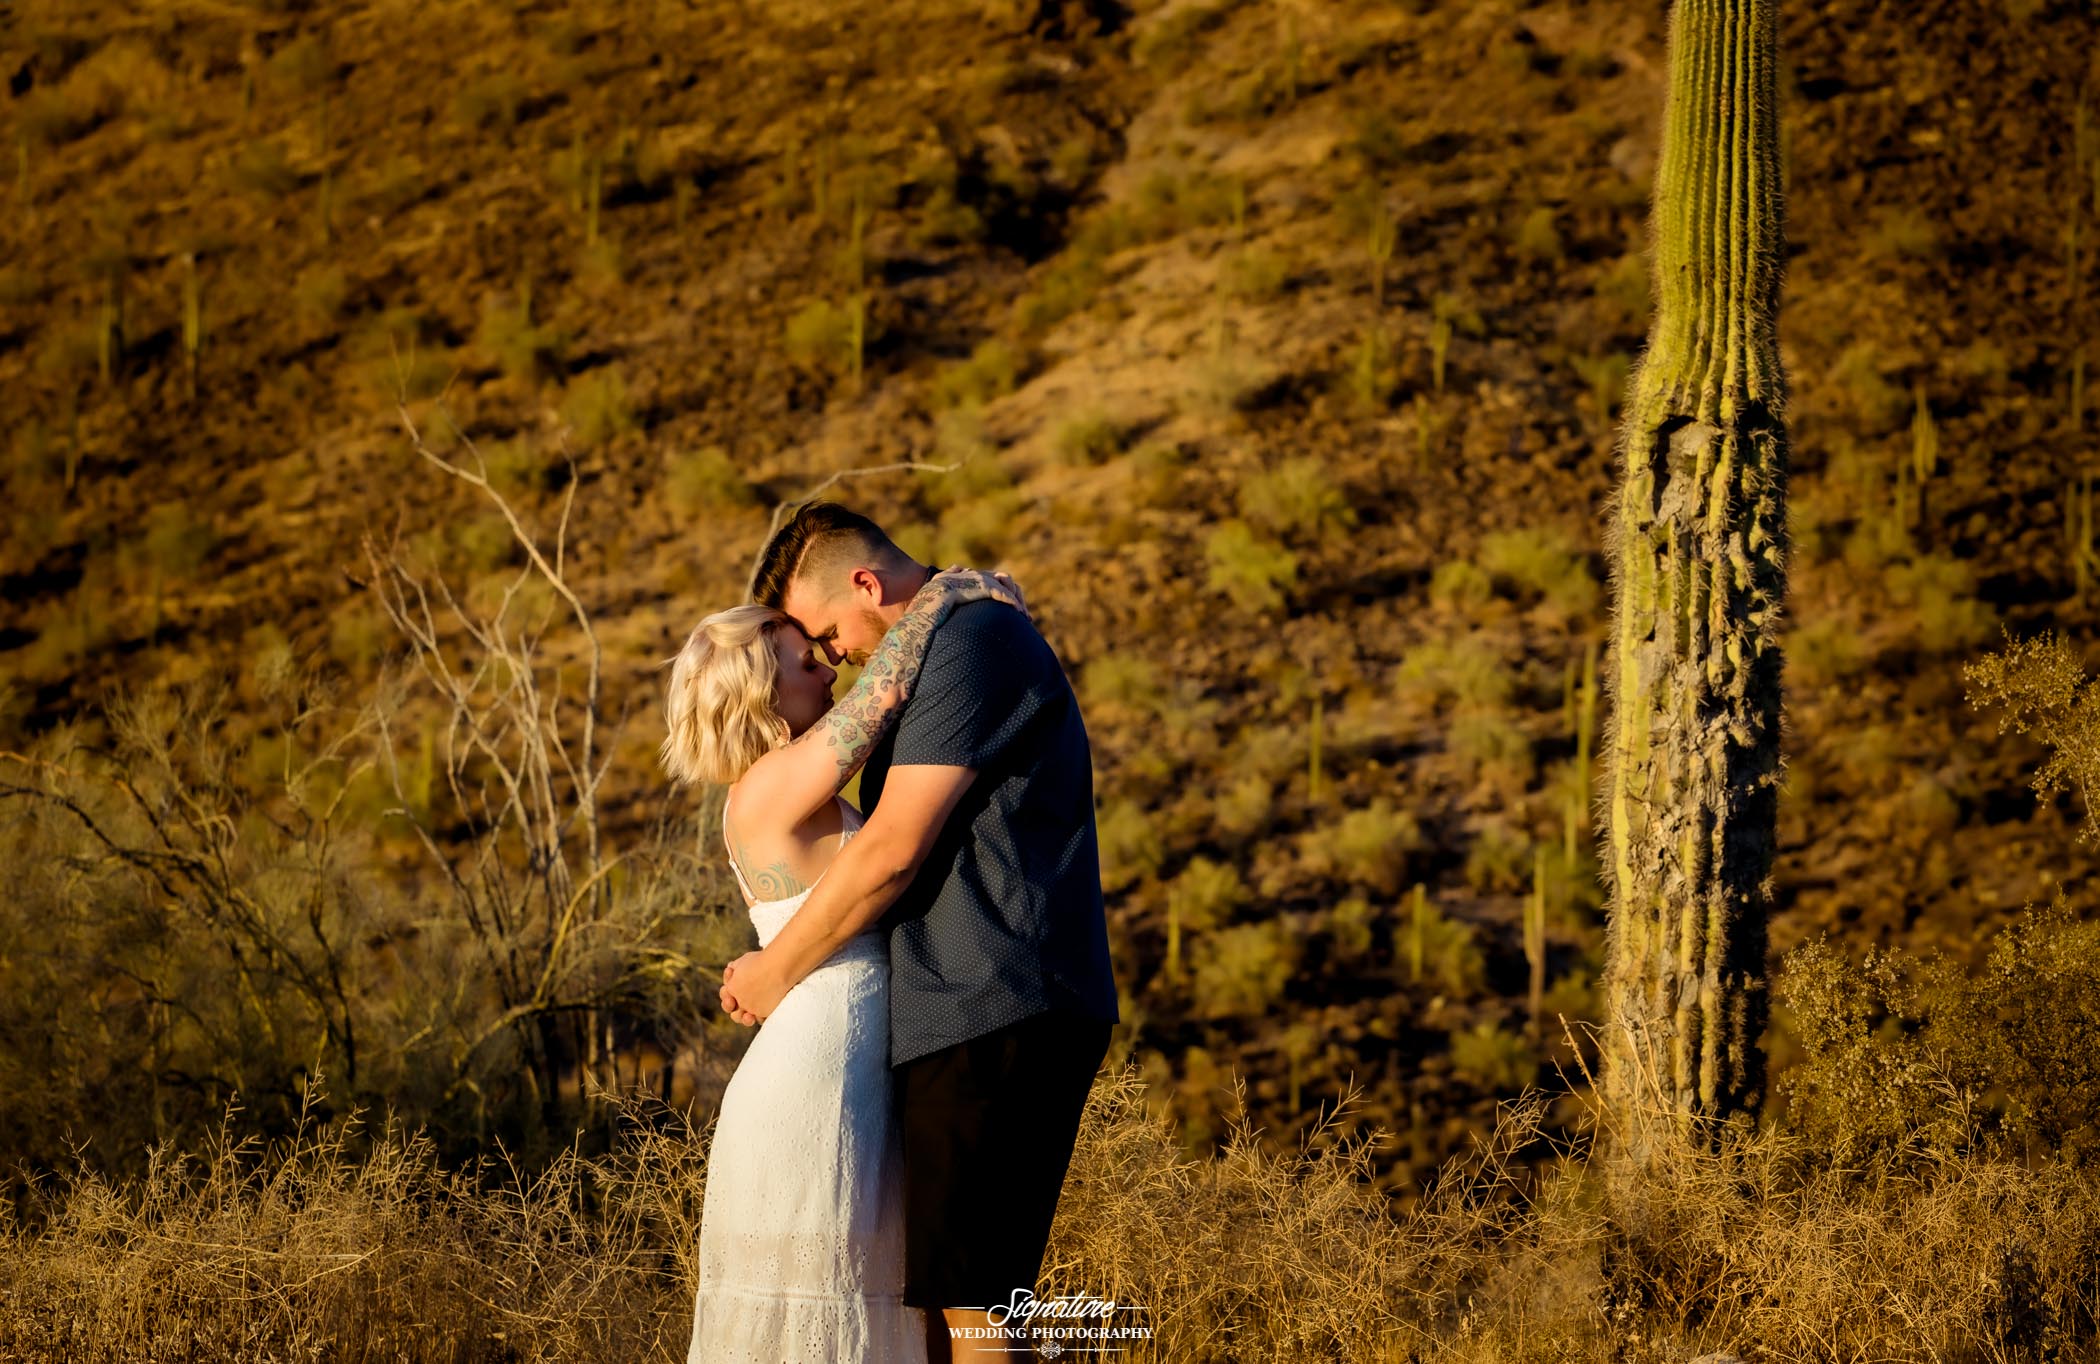 Couple in each other's arms in desert